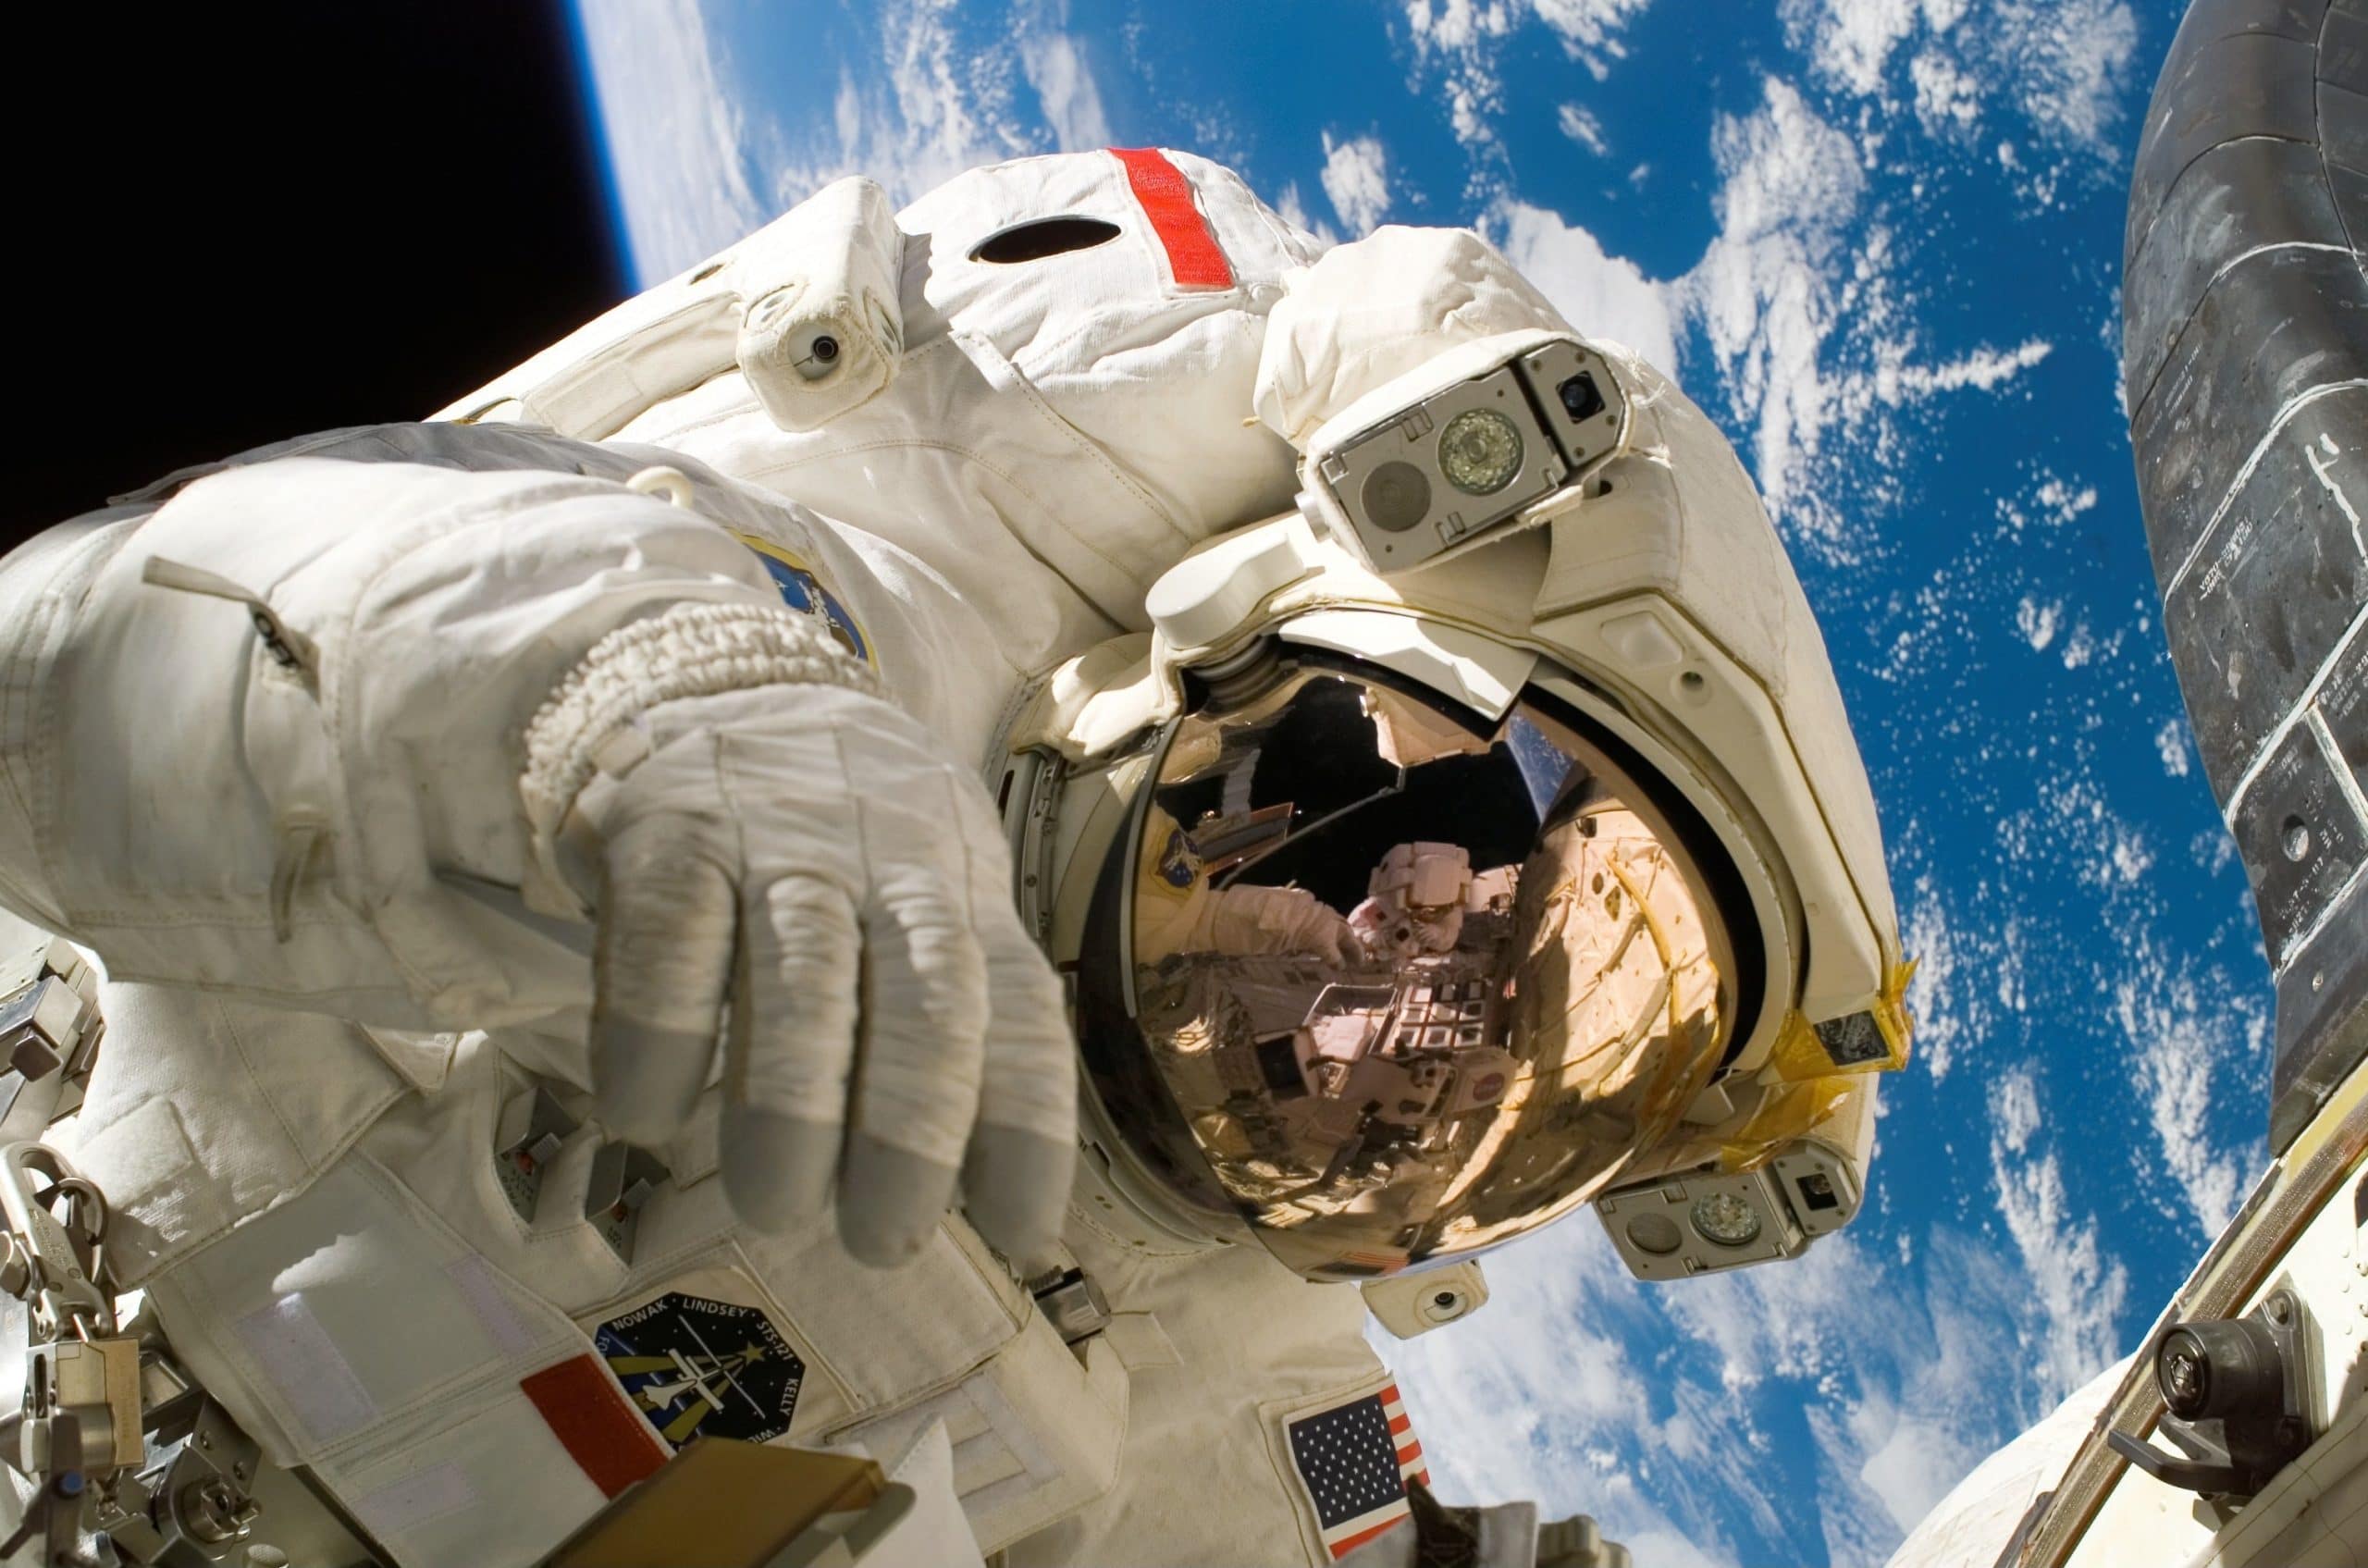 An astronaut in space with Earth visible in the background.